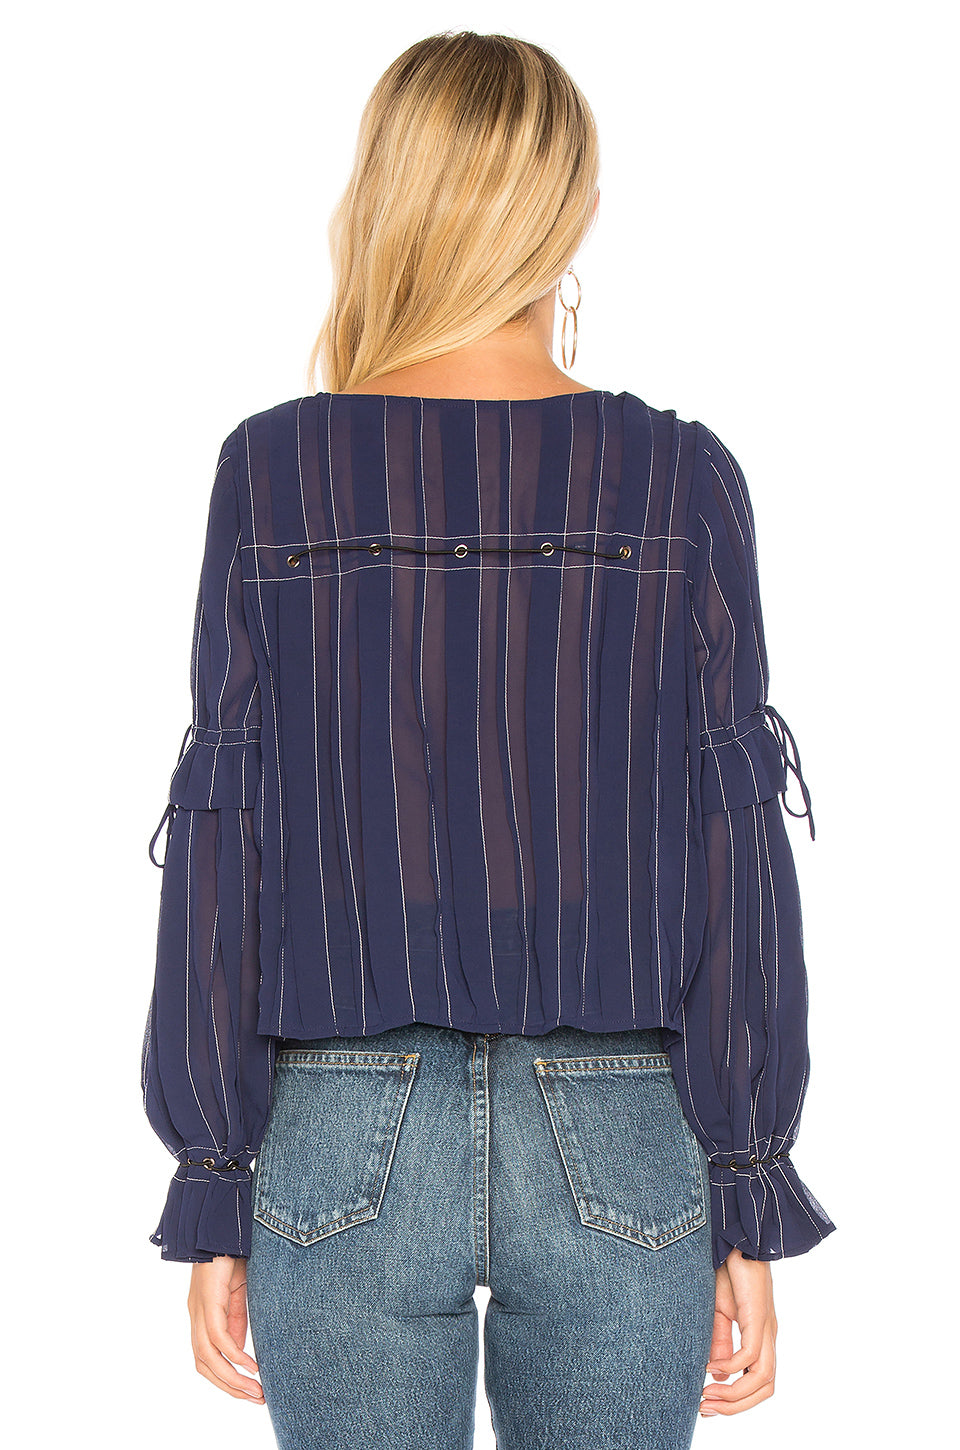 Bonnie Blouse in NAVY